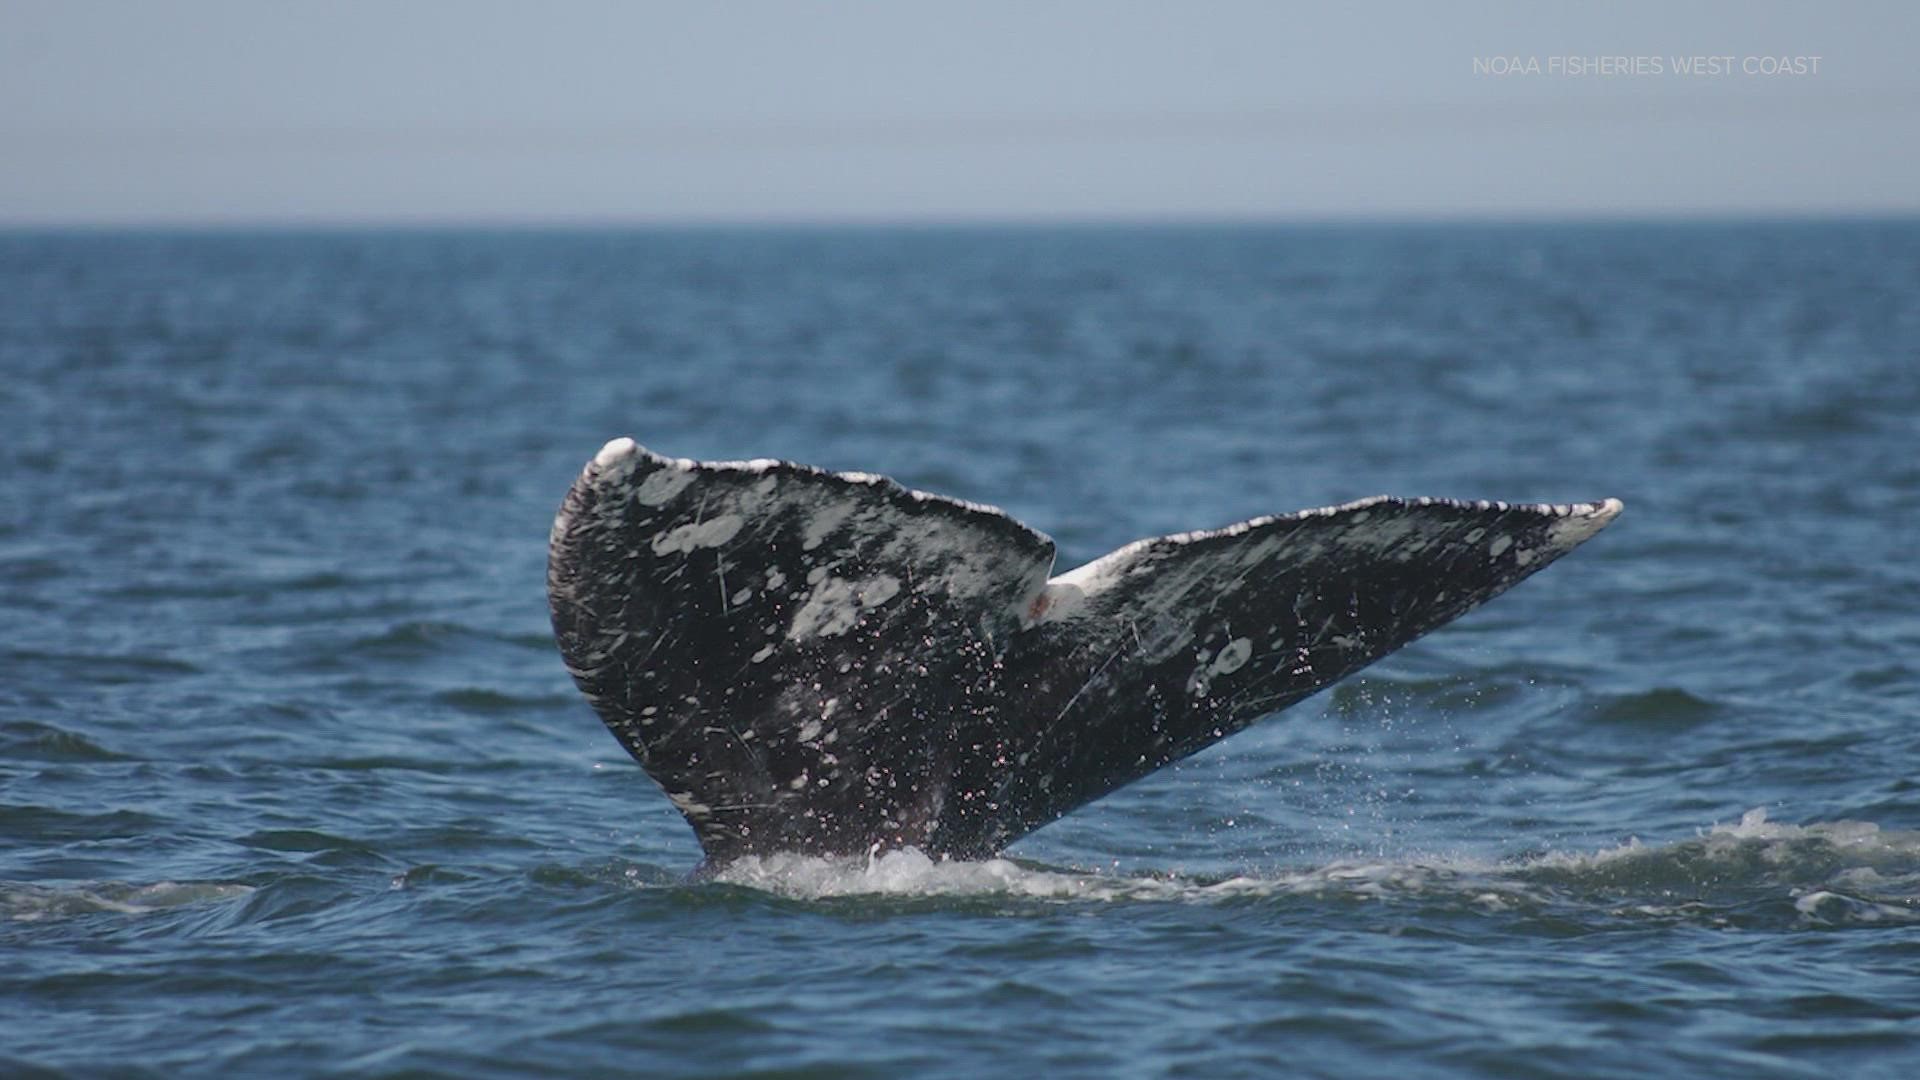 The number of gray whales off western North America has continued to fall, a decline that resembles previous population swings over the past several decades.